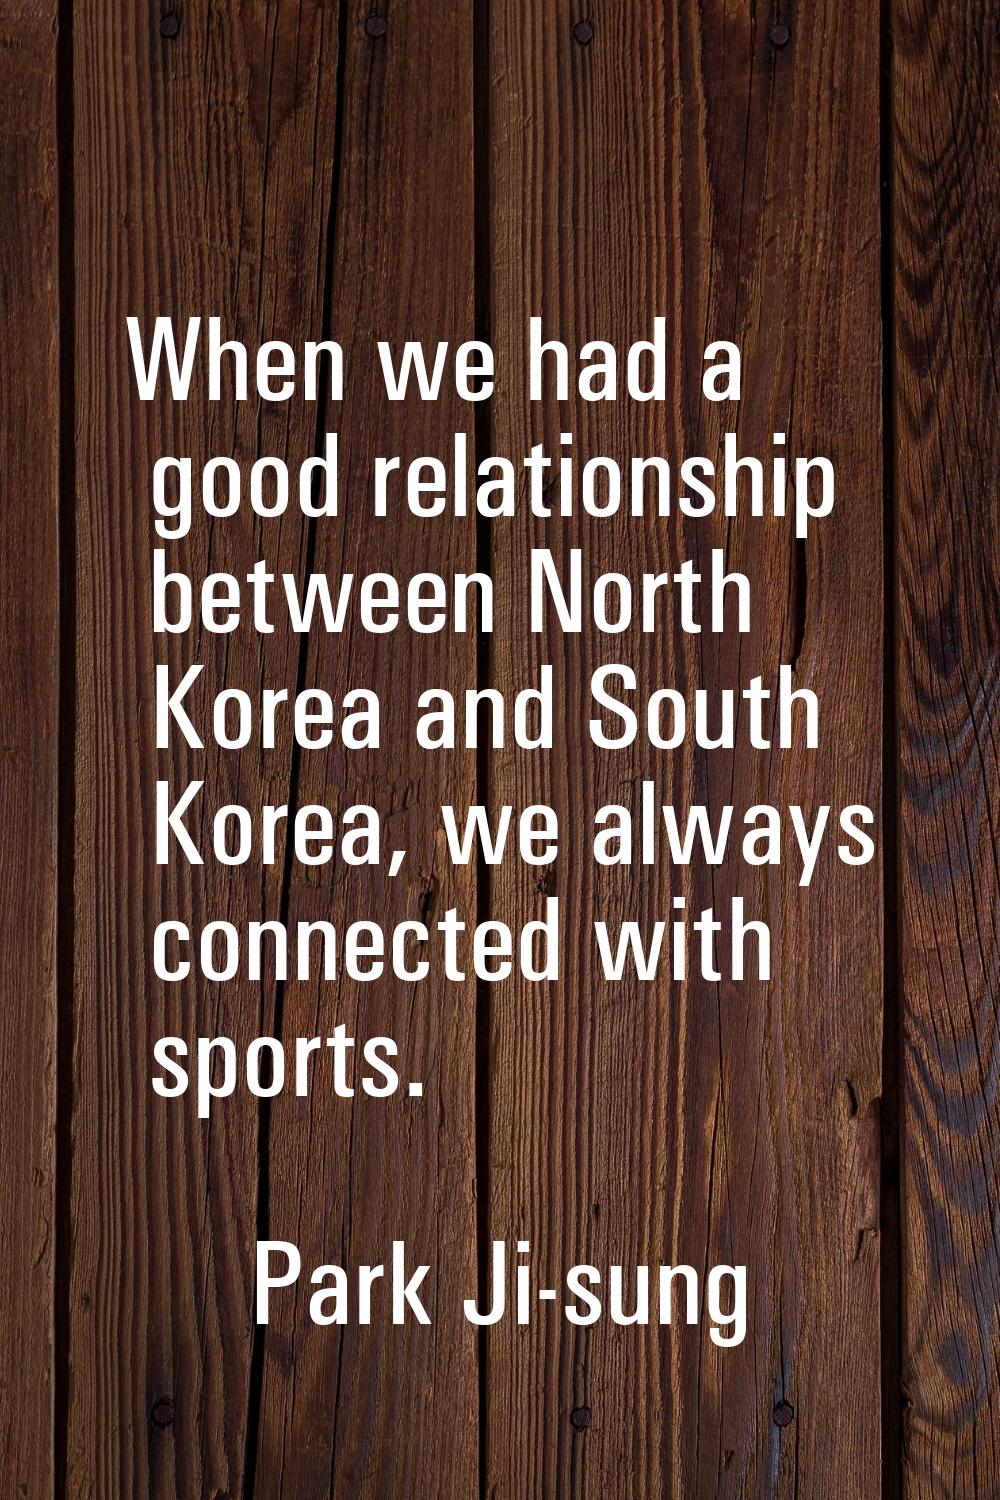 When we had a good relationship between North Korea and South Korea, we always connected with sport